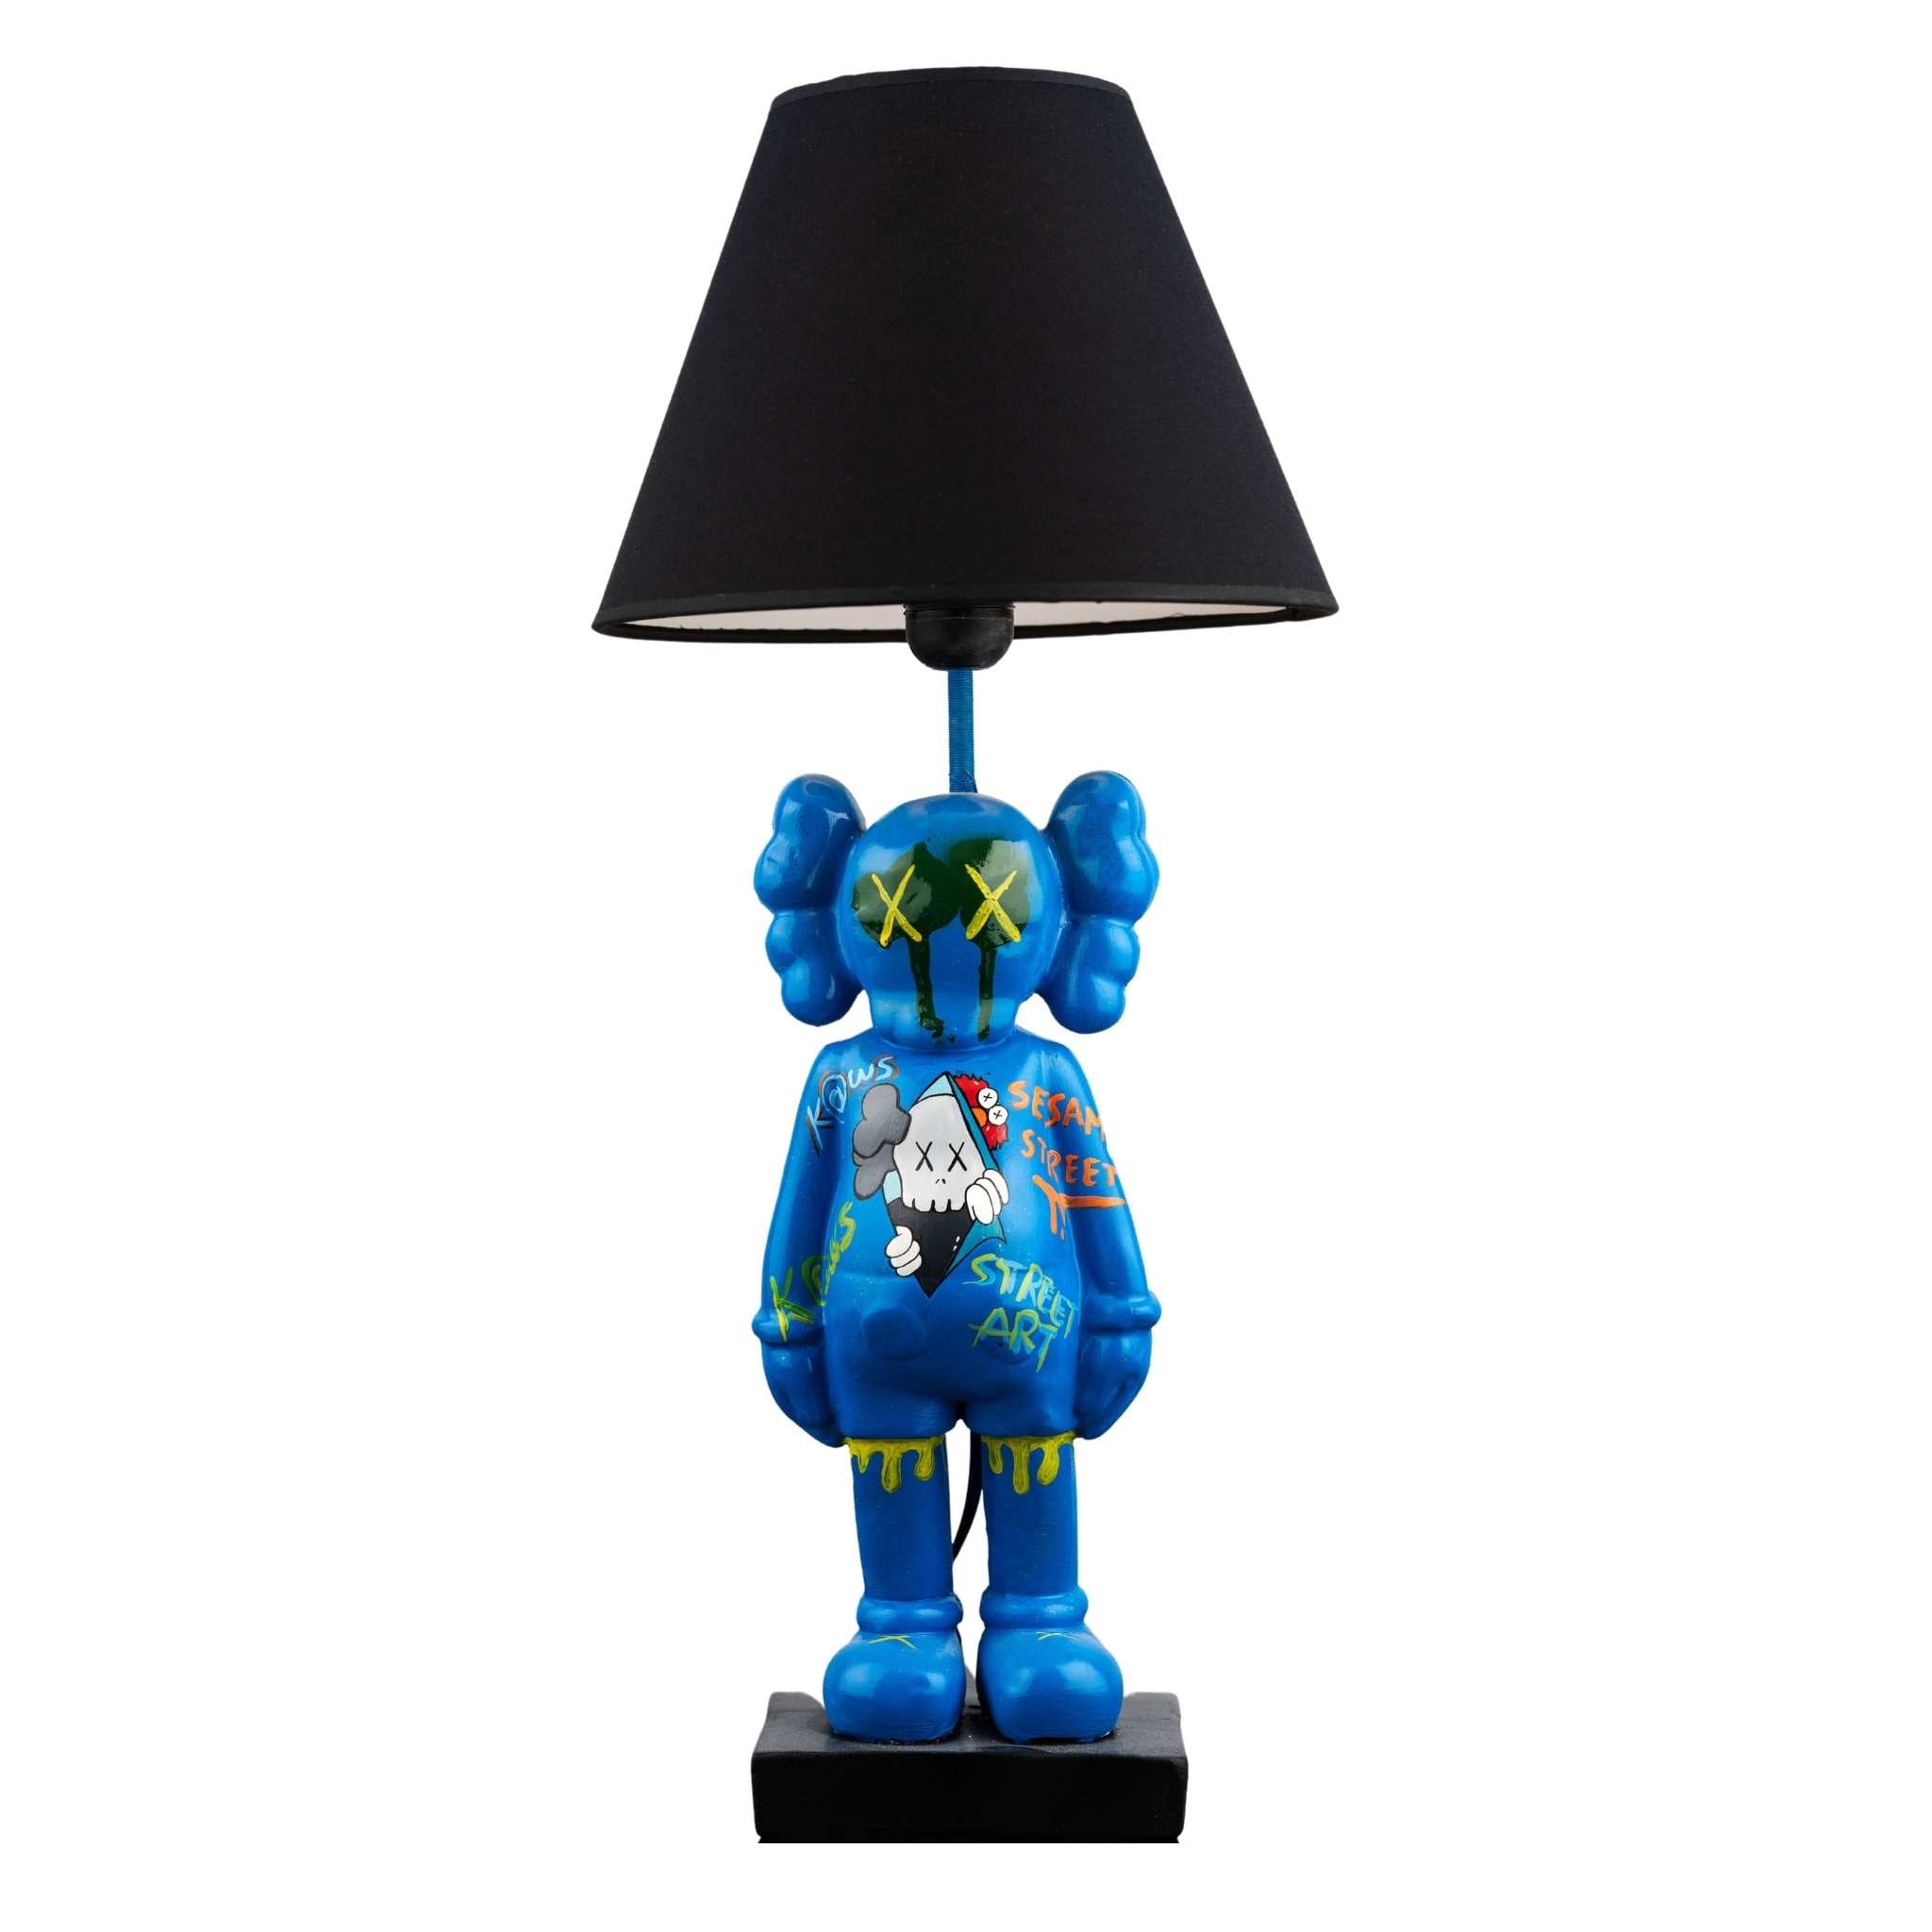 Illuminated Blue: The KAWS Sculpture with Lampshade